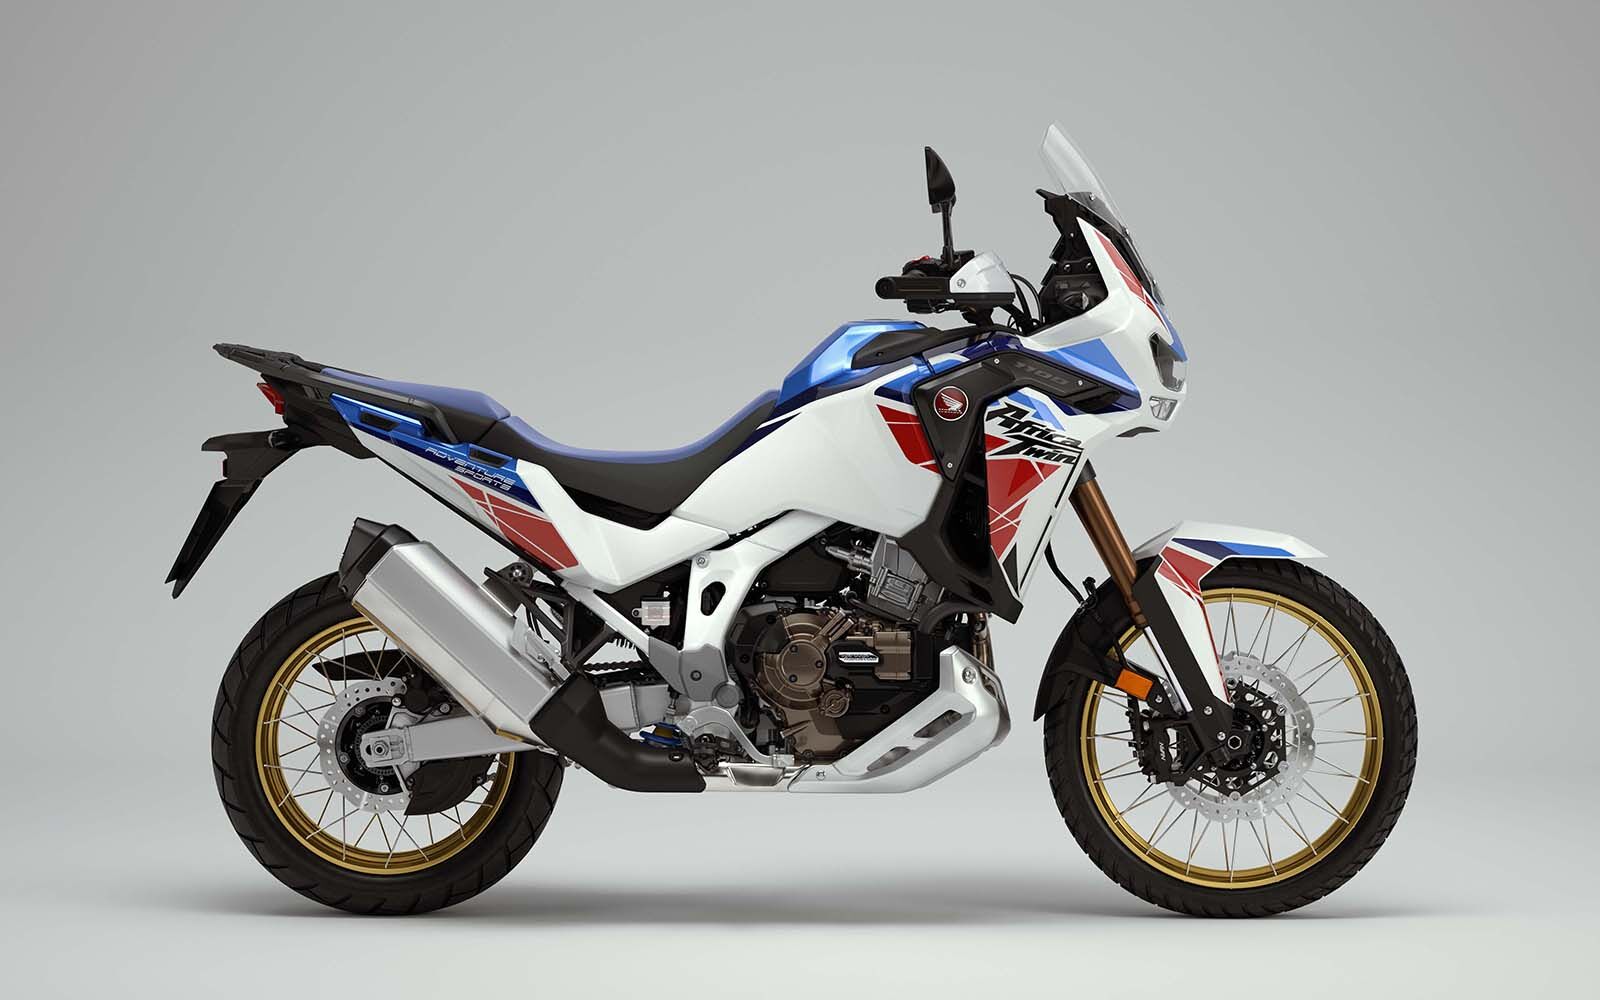 Thiết kế xe Africa Twin